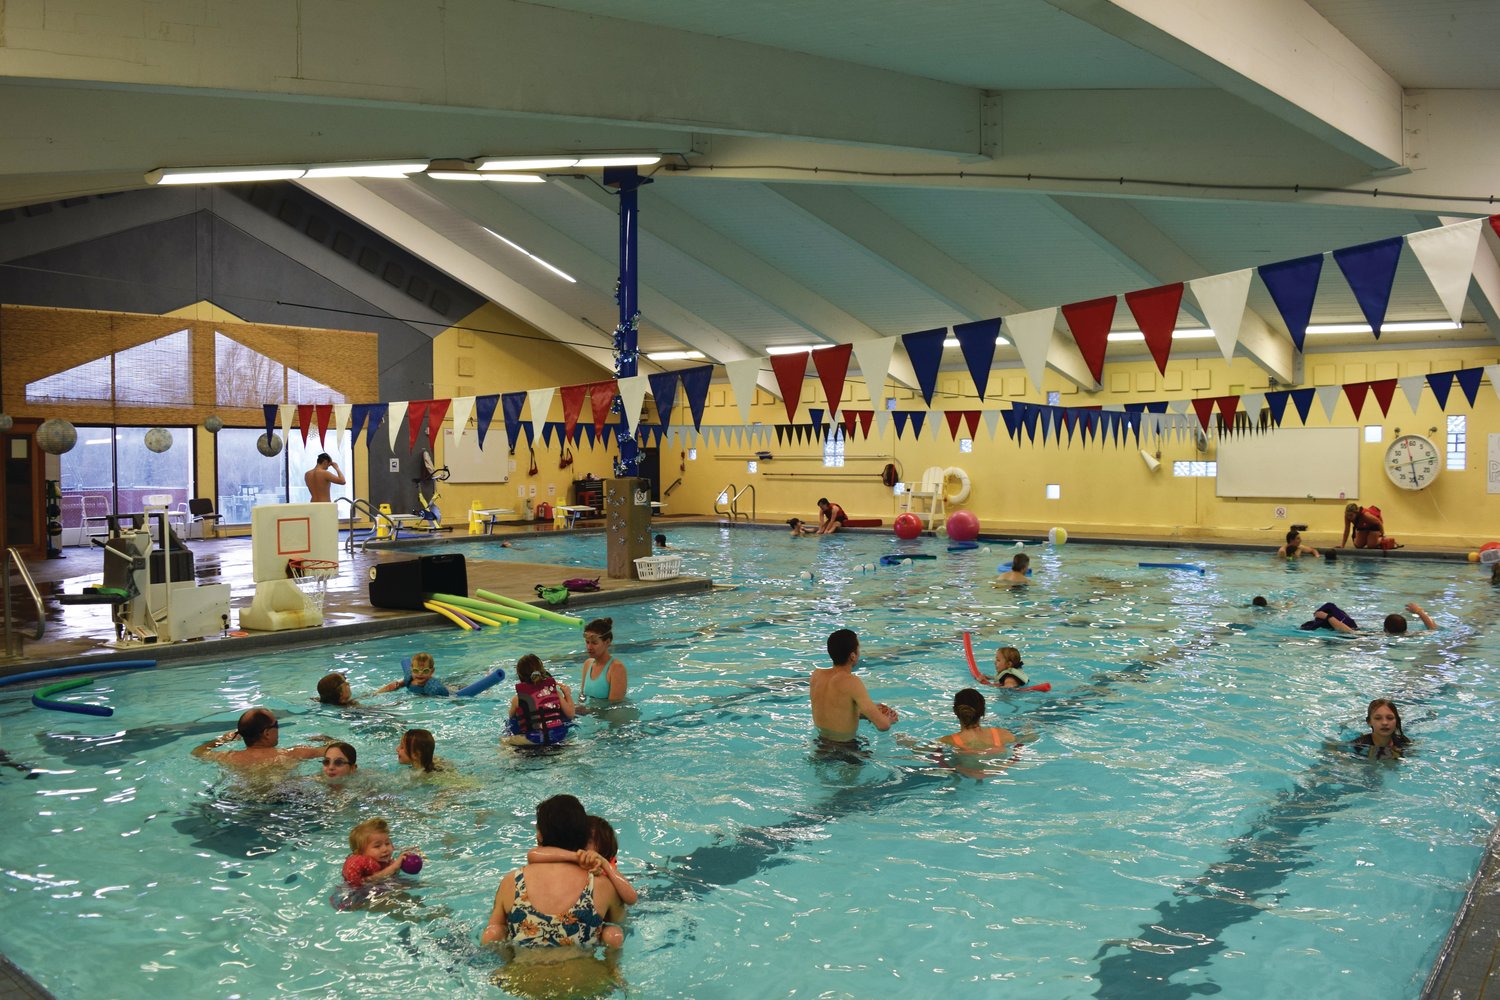 The Spring Splash Family Free Swim will be hosted at the Mountain View Pool, located at 1919 Blaine St. in Port Townsend.